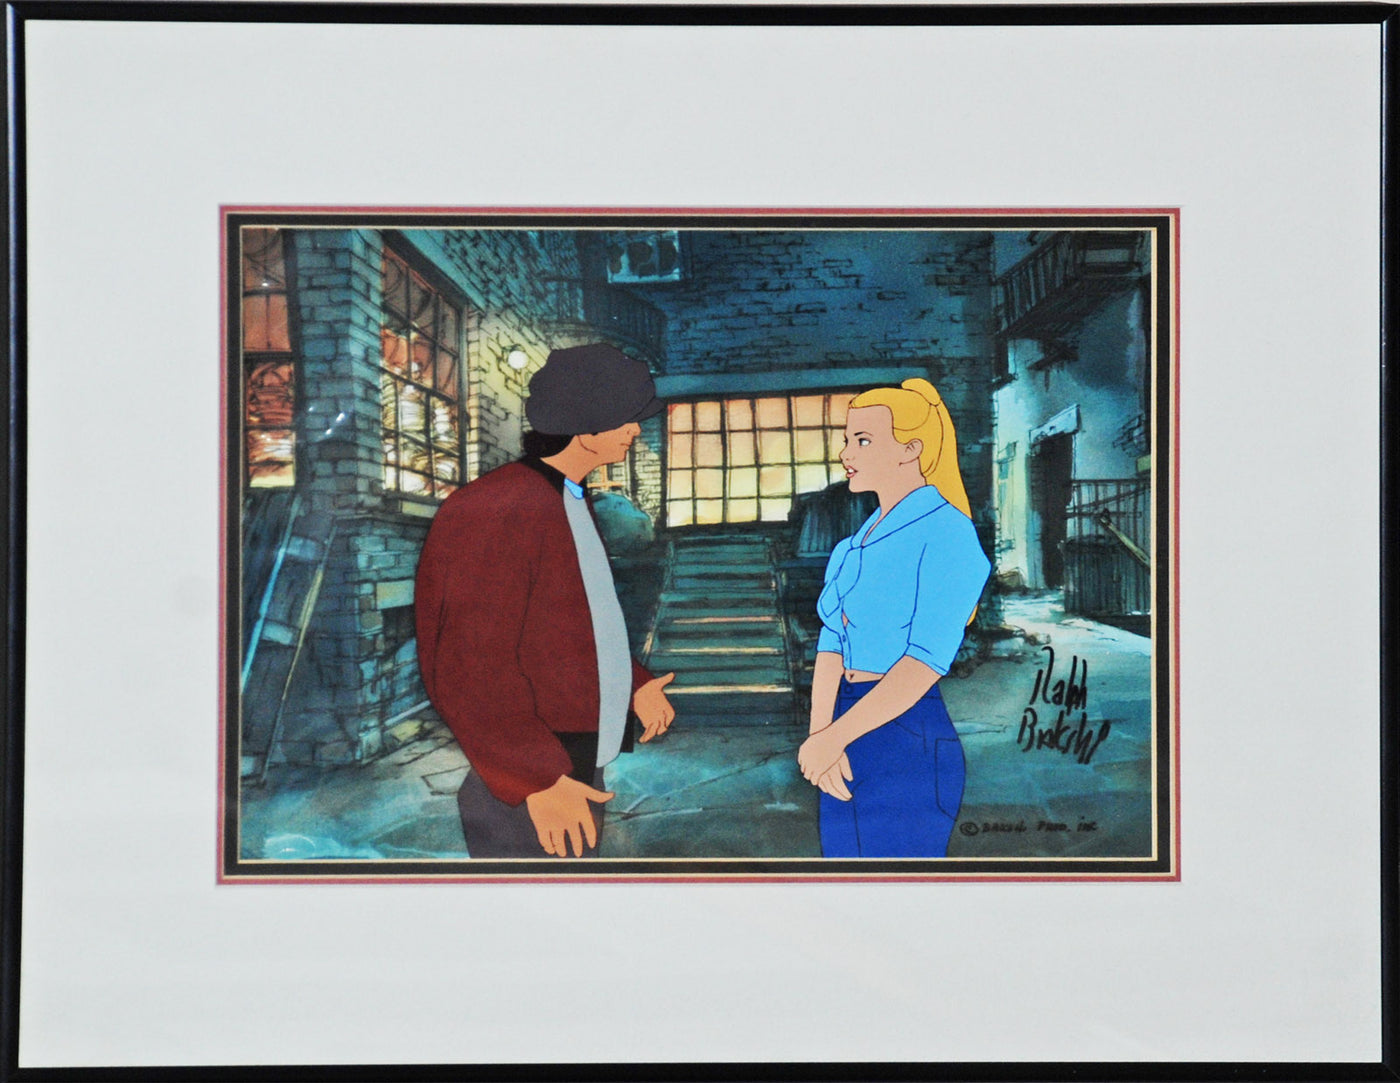 Original Production Cel from American Pop signed by Ralph Bakshi